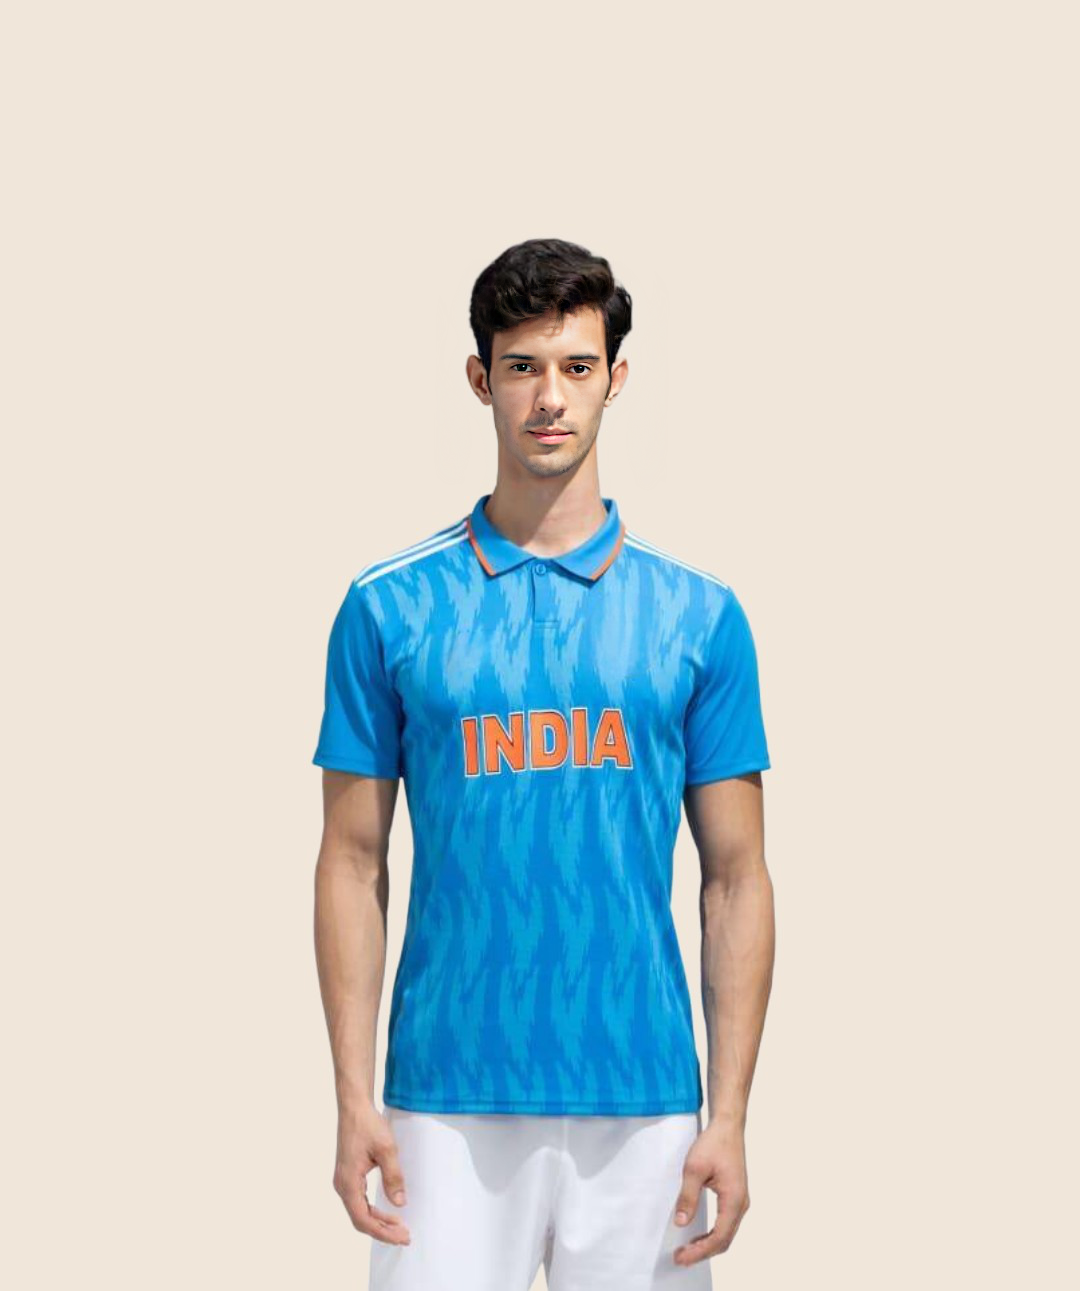 Buy Custom Indian Cricket Team Jersey for Roundneck/Collar, Half Sleeve  India Print Name and Number (Medium) Blue at Amazon.in